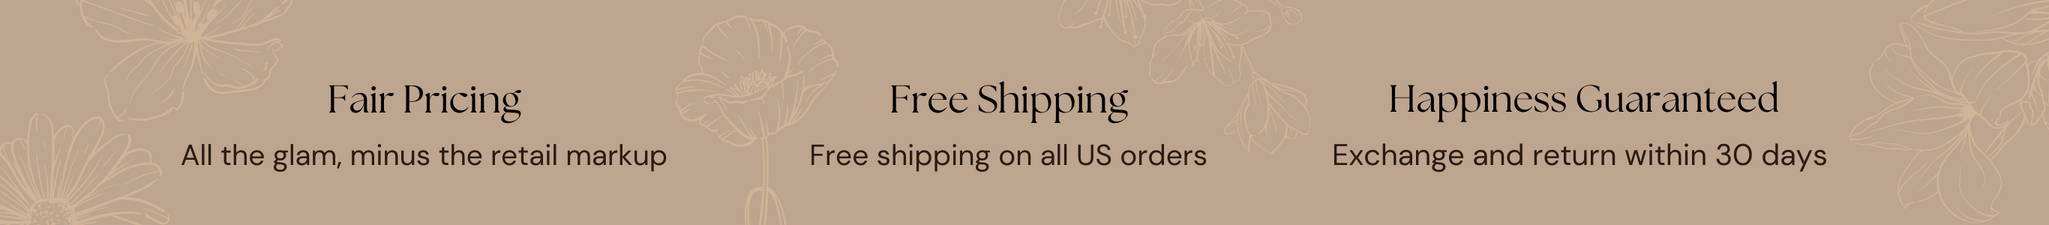 Free shipping affordable lingerie brand with free exchange and return within 30 days.